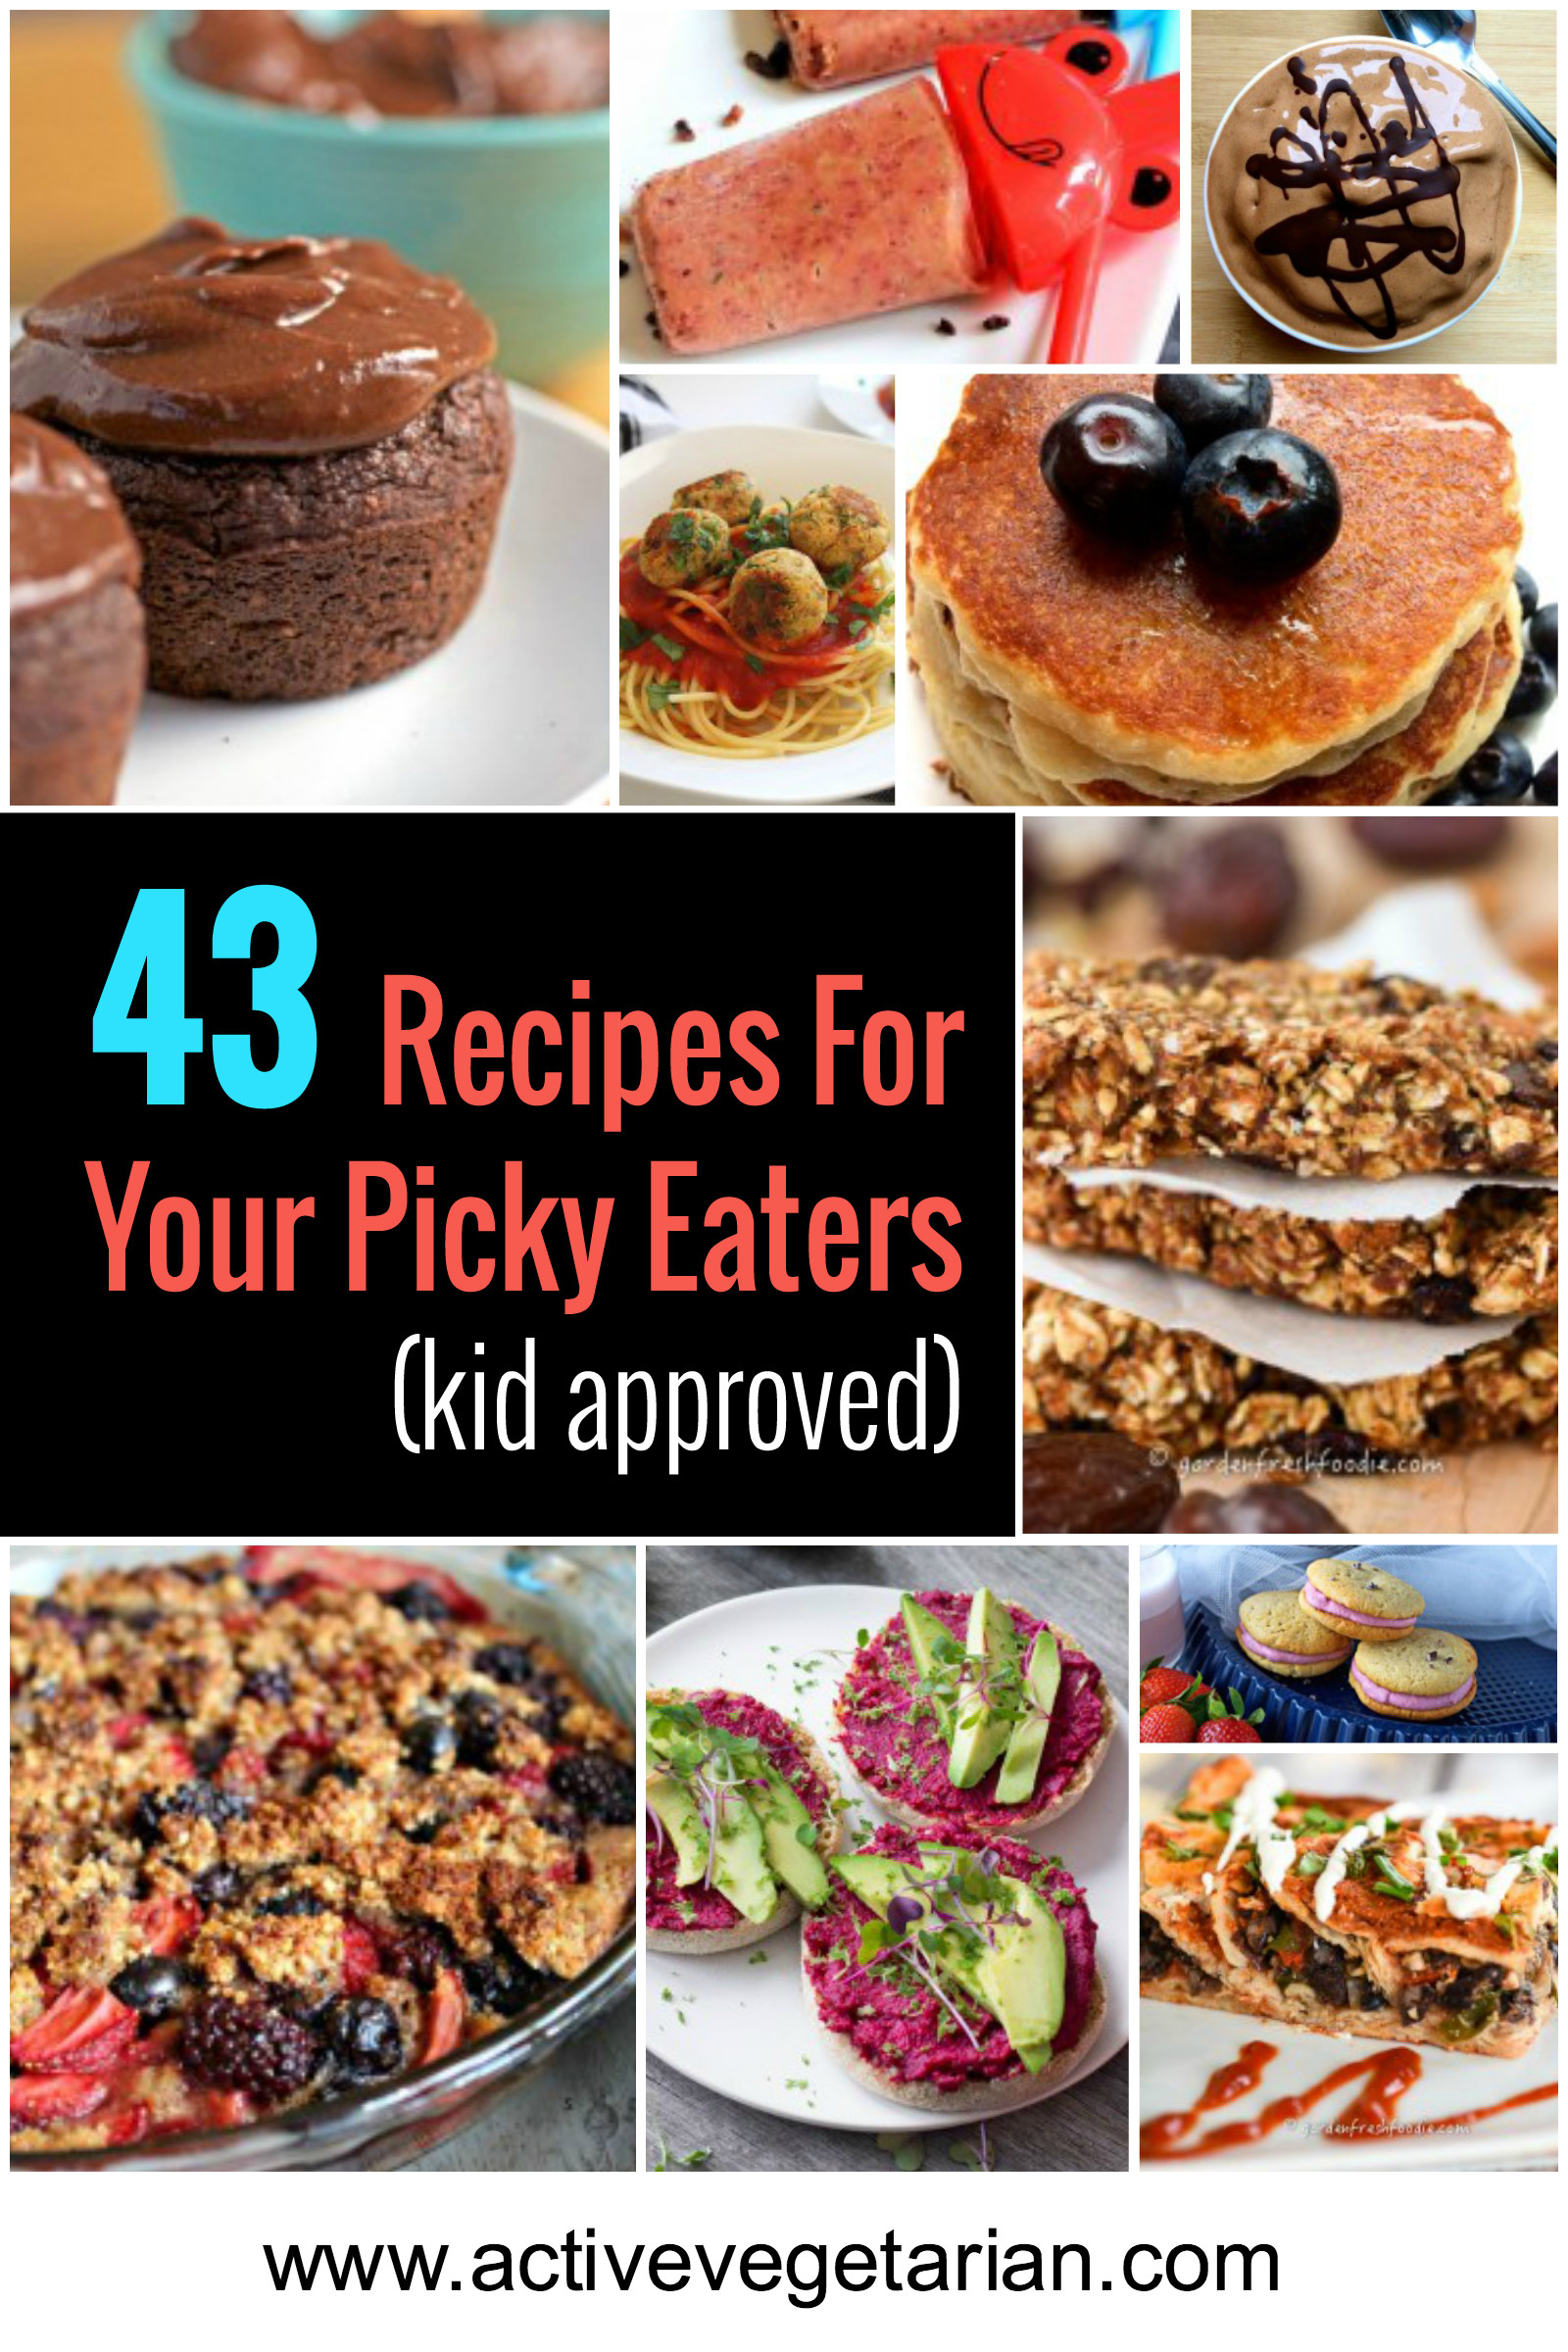 Heart Healthy Recipes For Picky Eaters
 lentil recipes for picky eaters